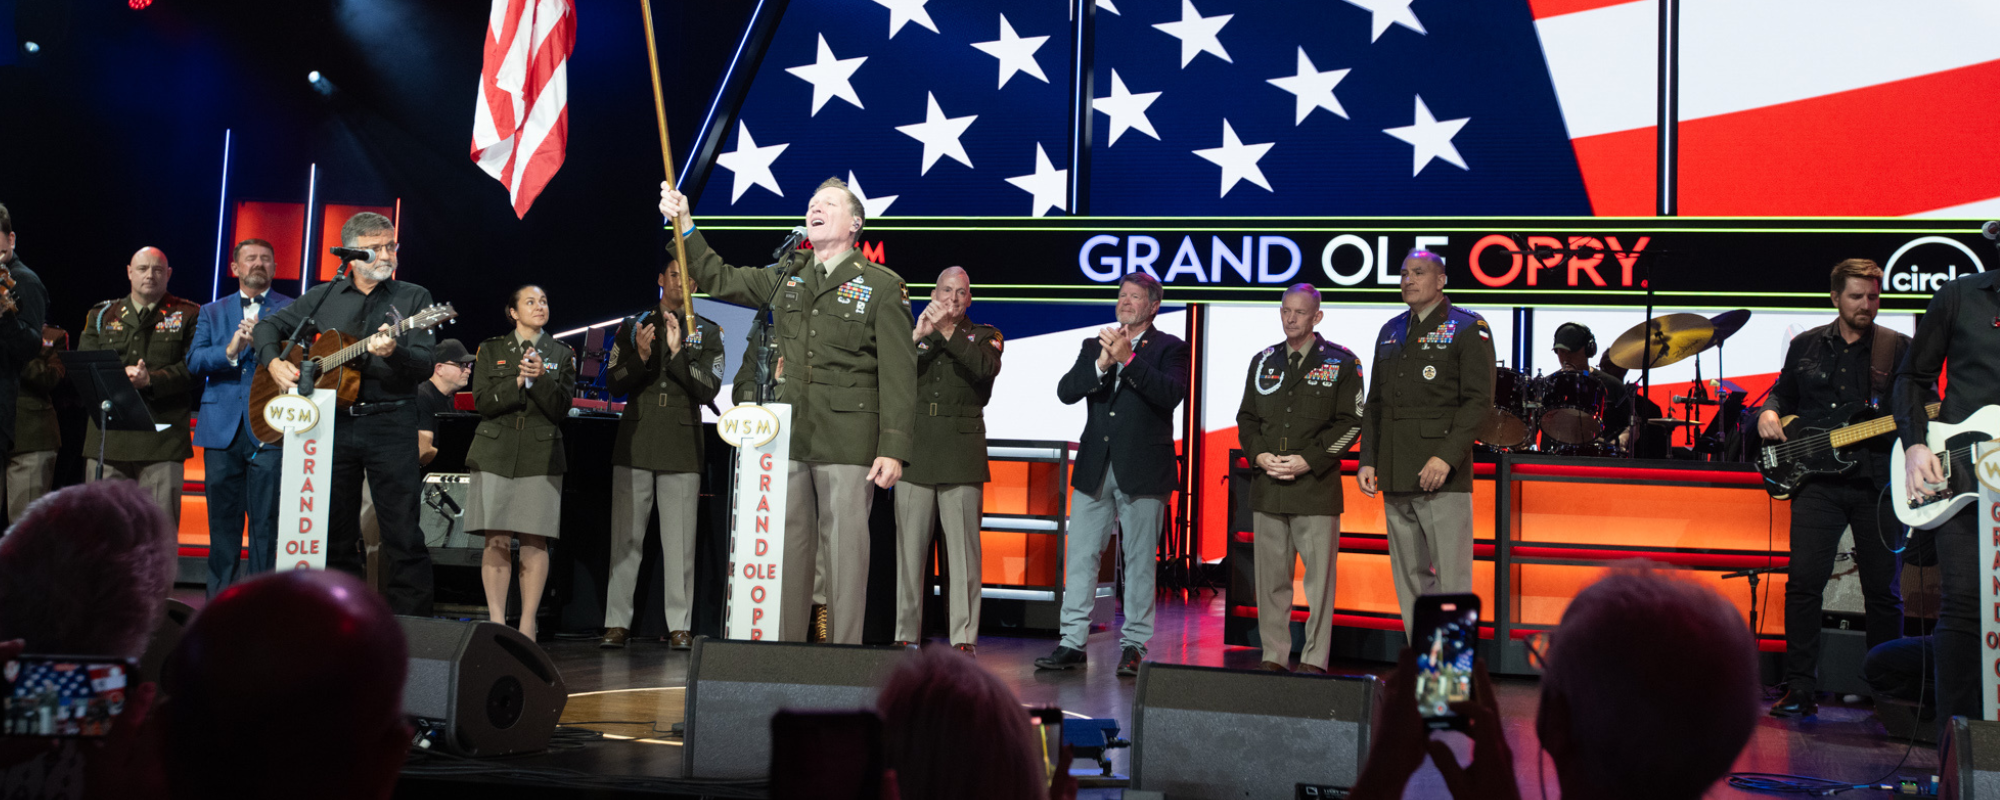 Craig Morgan Enlists in Military Service, Sworn in at the Opry